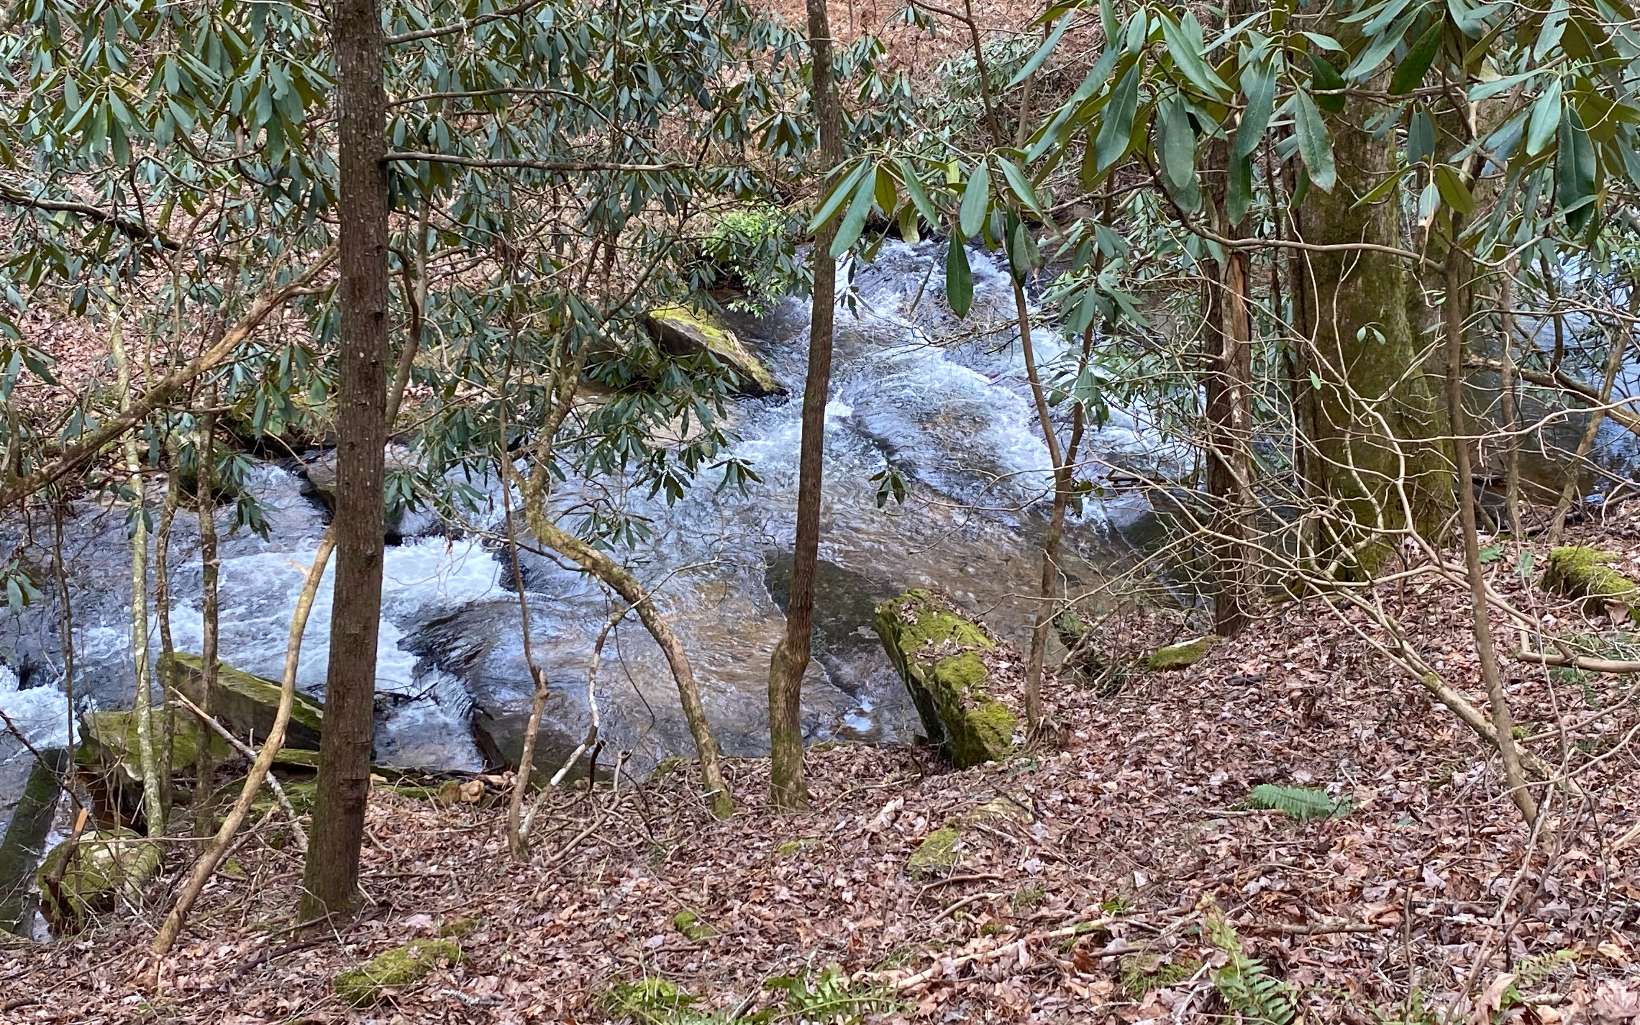 Have the best of what North Georgia living has to offer! This 3.32 acre lot has a great building spot as well as creek frontage with a small waterfall cascading over the rocks! Lots of water noise and views from this lot! You are just a short walk away from access to over 20,000 acres of National Forest. Perfect building spot situated to have the sounds of the creek from your front porch. Easily have two driveways either from front of lot or from back of lot. Mature hardwoods all over the property and native Mountain Laurel throughout. Views of the mountains that are the southern mountain range for the Tennessee Valley Water Shed. Also view of the Georgia/Tennessee lines! Lot shares a well with 4 other homes/lots making water expense very minimal. Wineries, apple orchards, eateries, and more are just a short drive away!